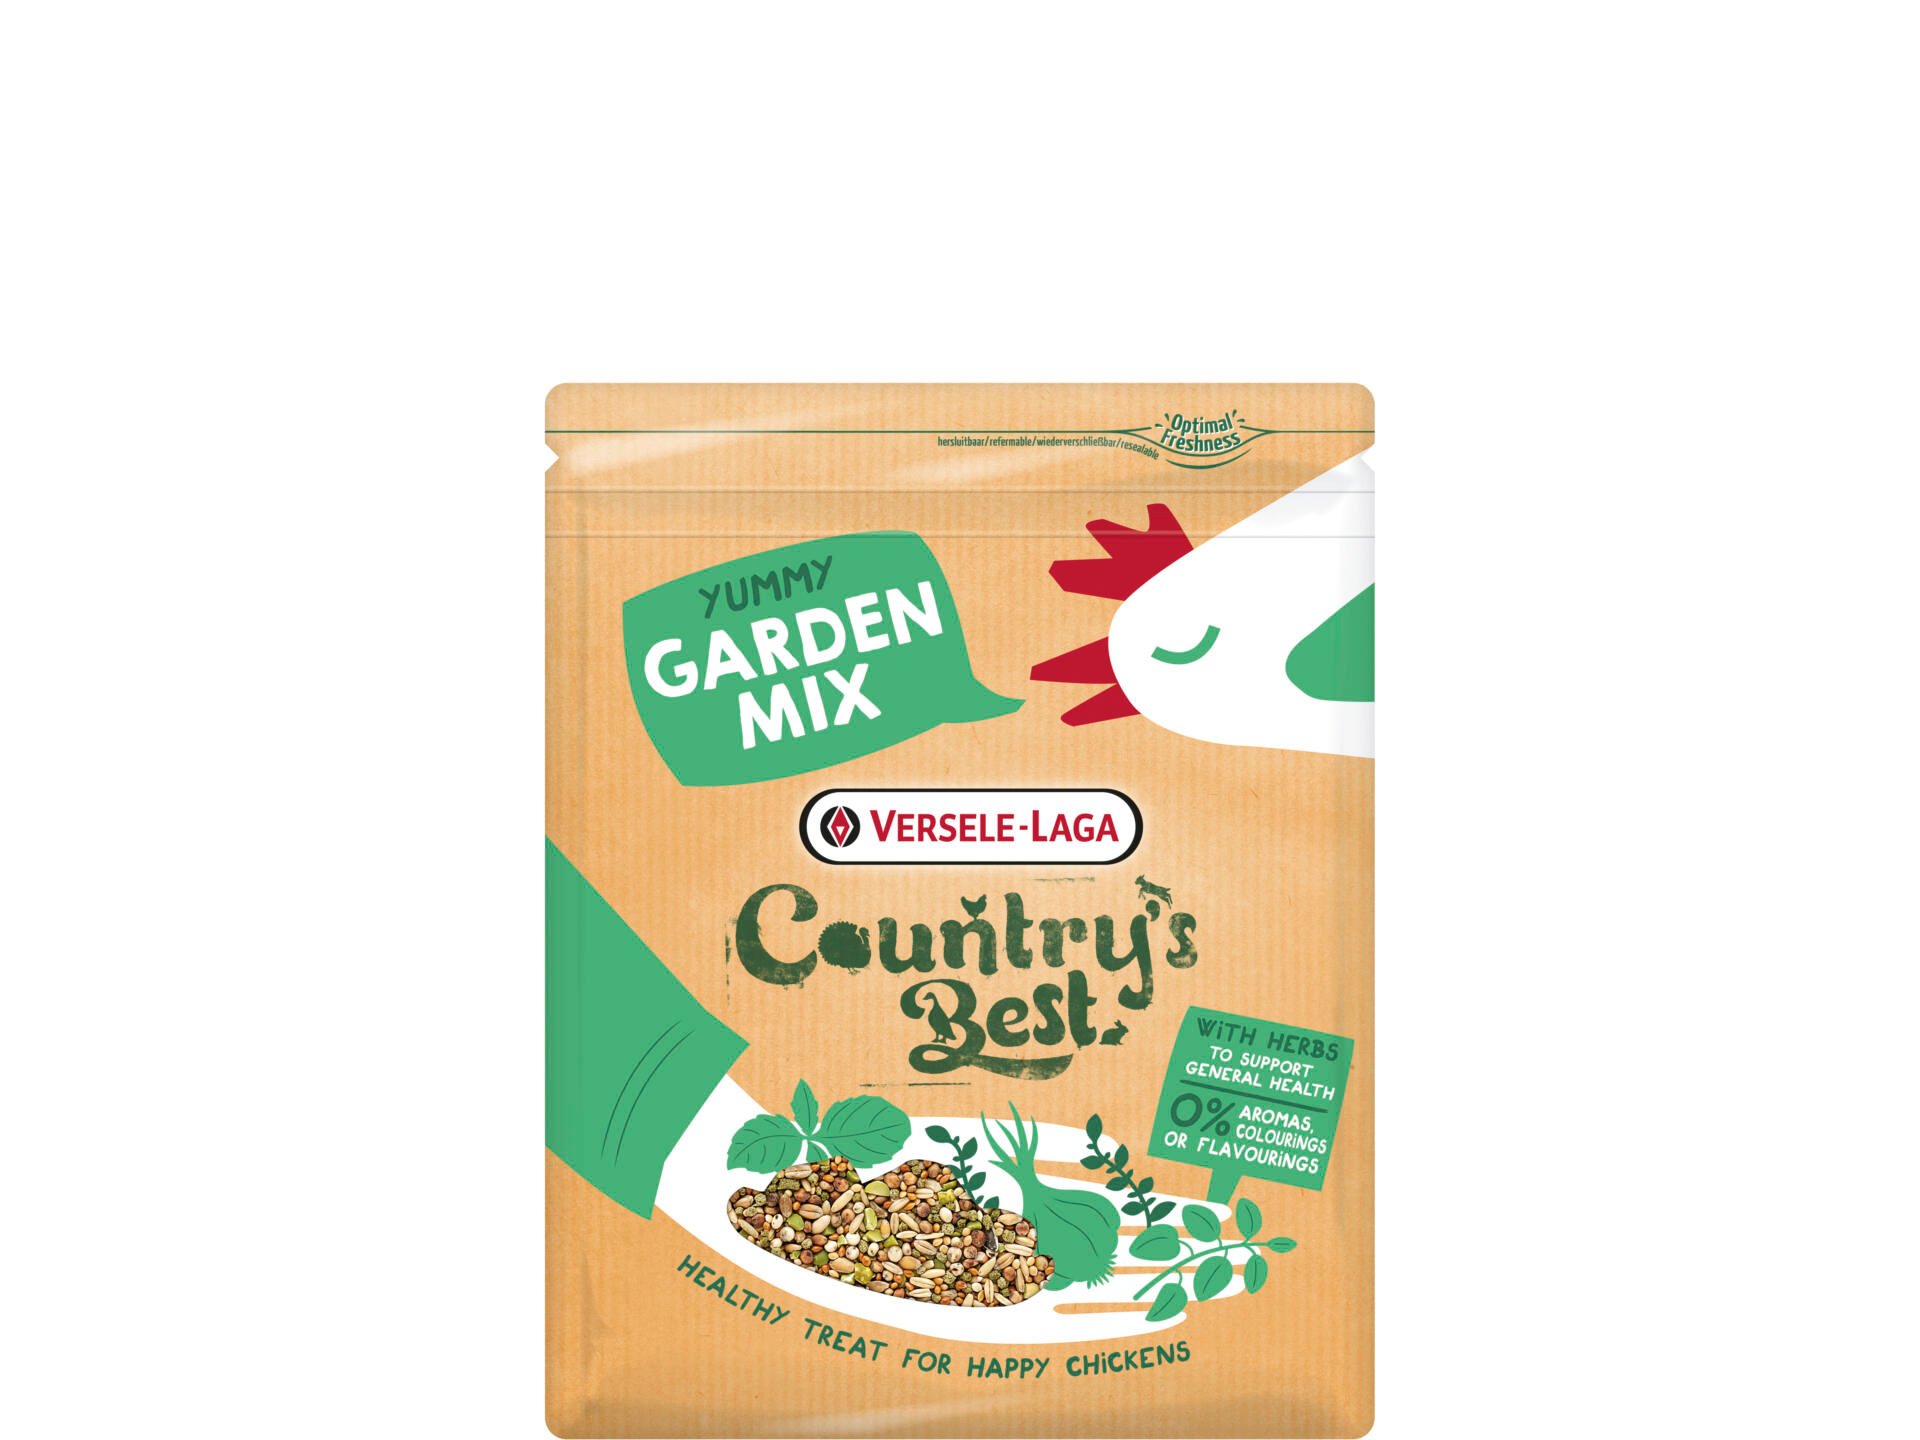 Country's Best Country's Best Snack Garden Mix nourriture poule